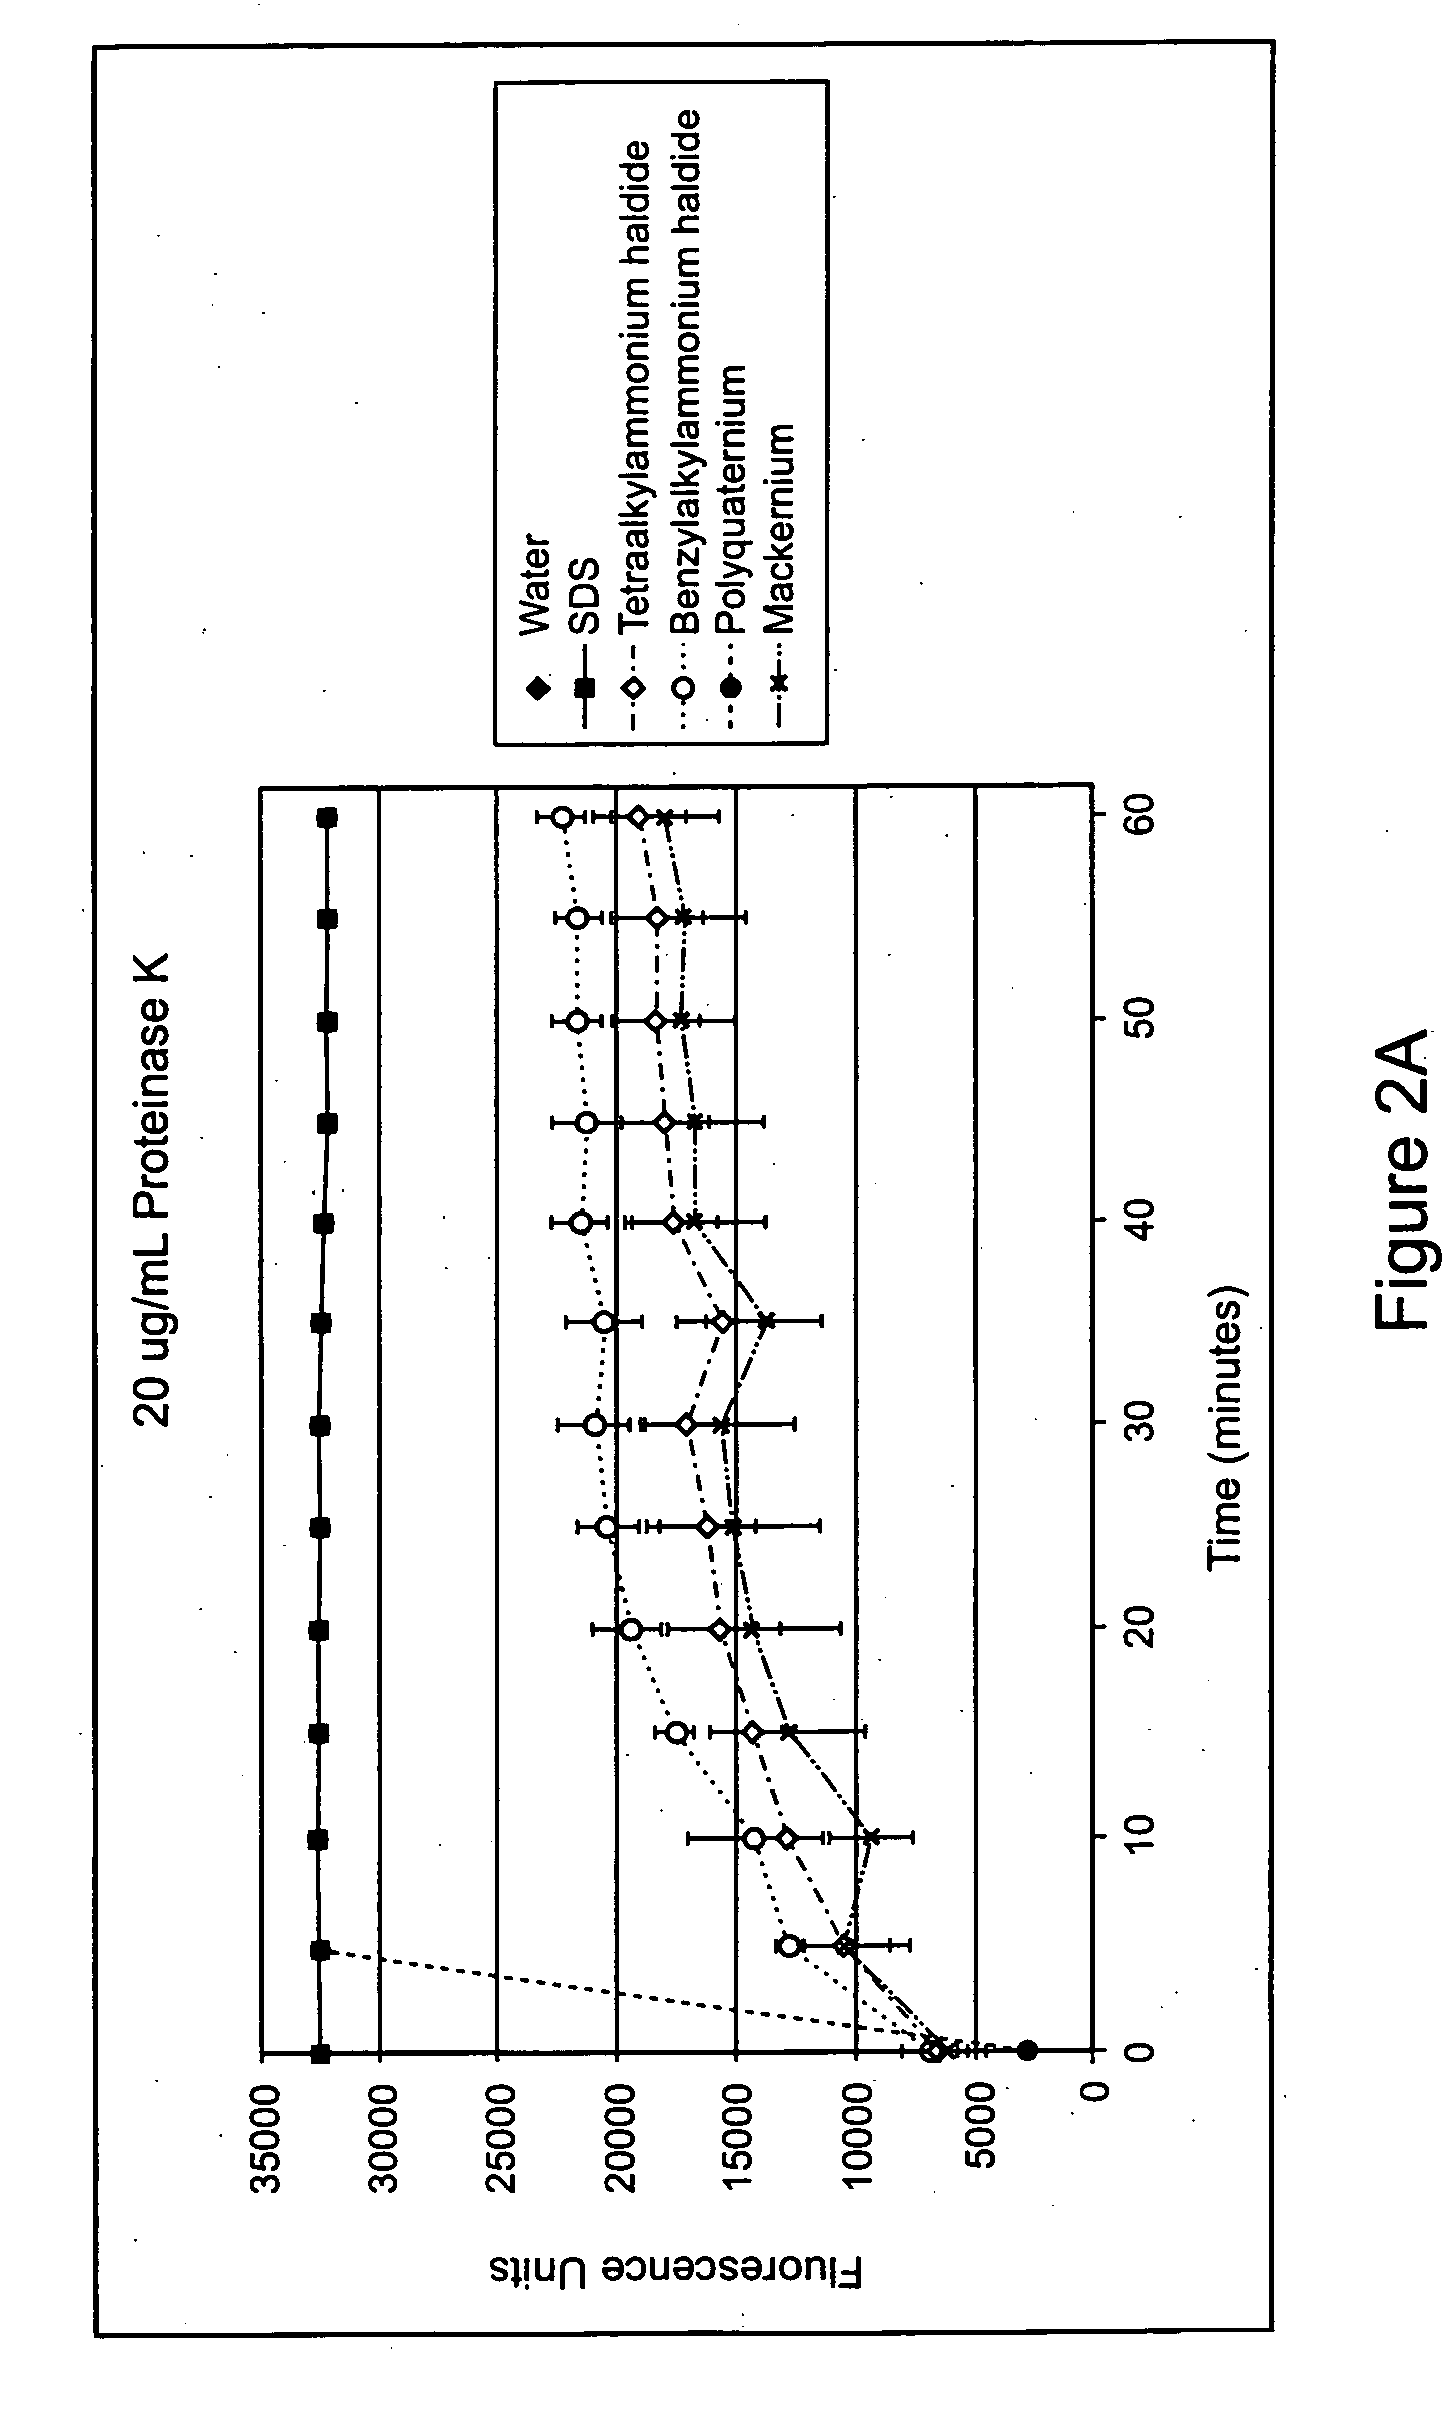 Compositions, methods, and kits for isolating nucleic acids using surfactants and proteases